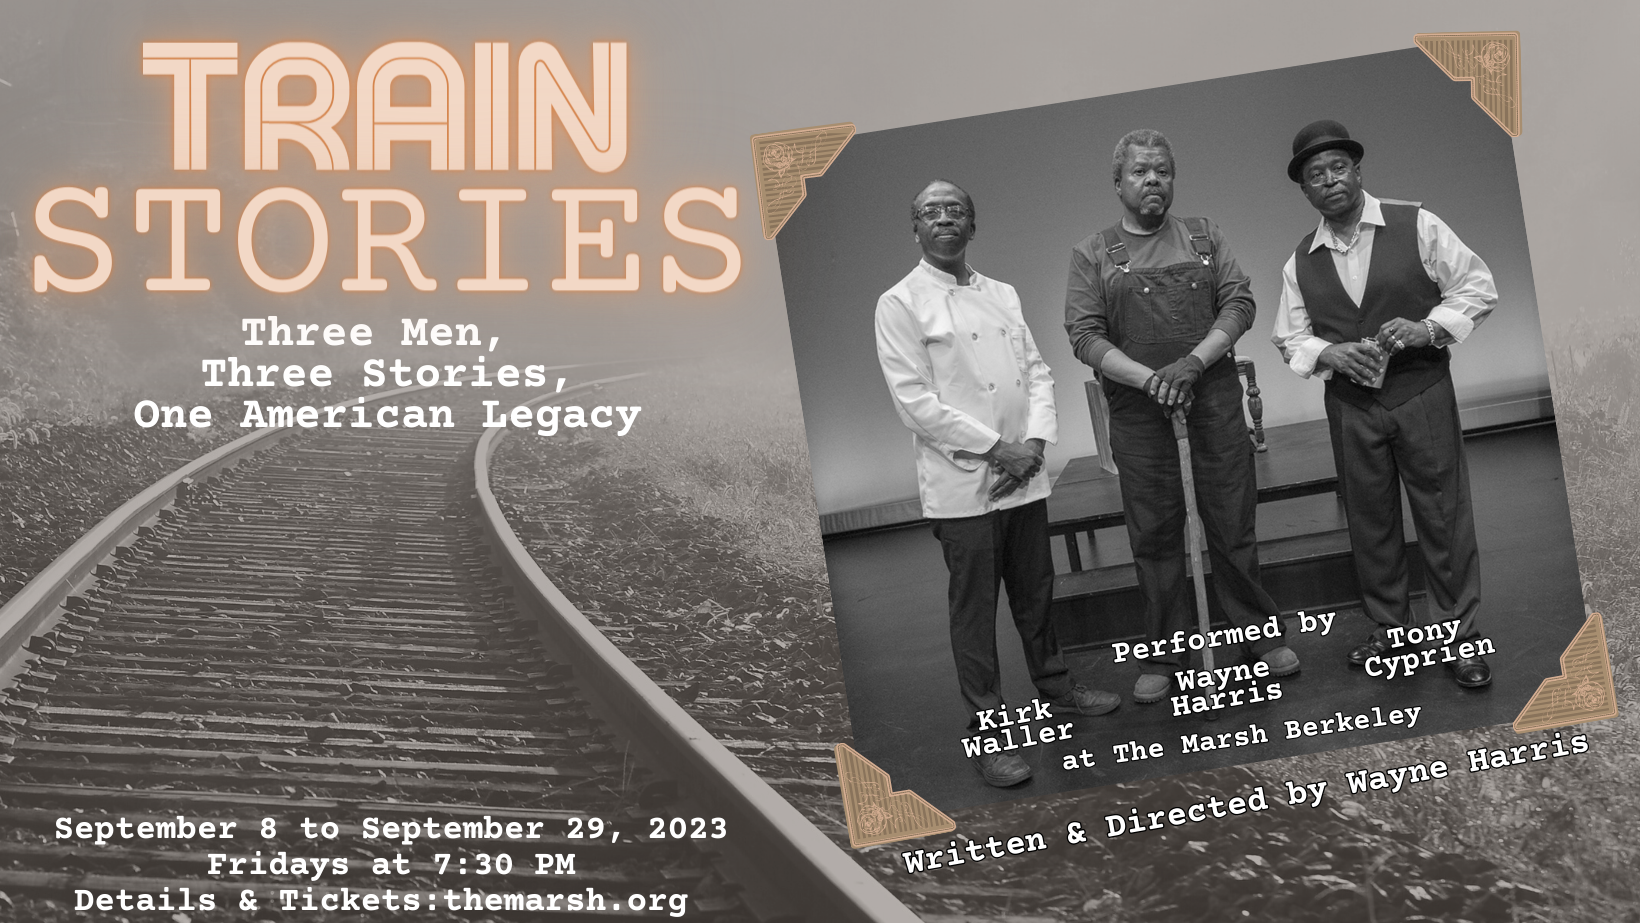 Train Stories graphic, with 3 actors and train tracks